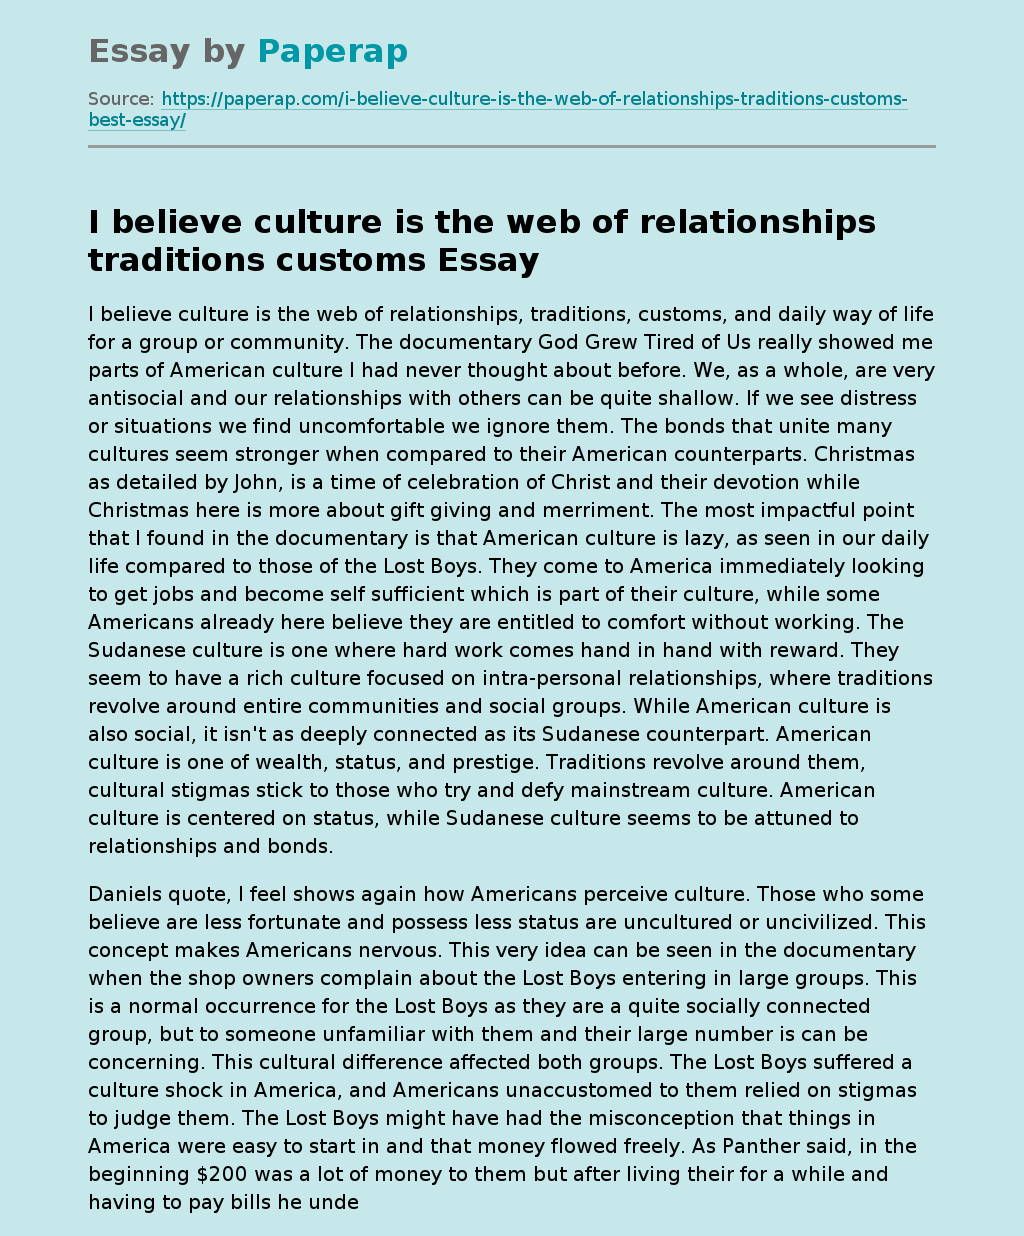 I Believe Culture is the Web of Relationships Traditions Customs